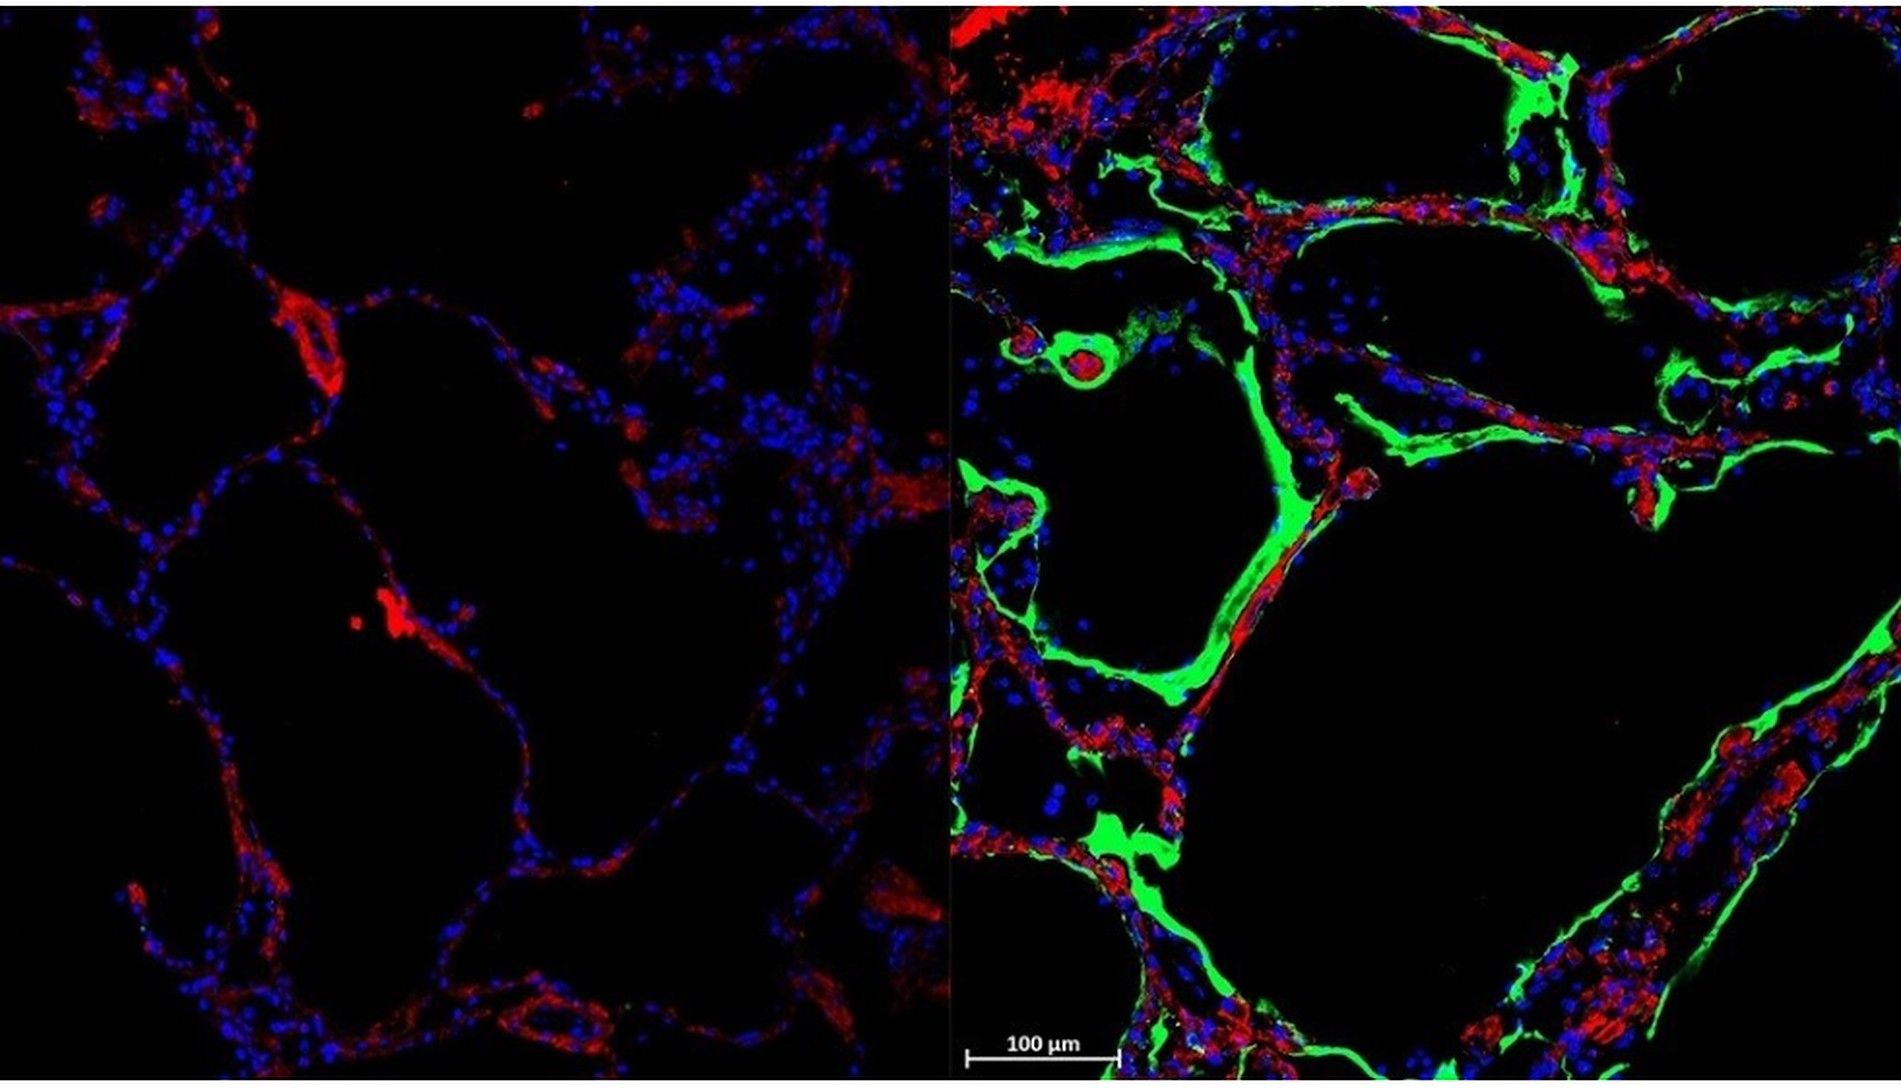 Left: A healthy control lung. Right: Immunofluorescent staining showing the newly discovered SARS-CoV-2 spike-receptor LRRC15 in green in post-mortem lung tissue of a person who died of COVID-19.